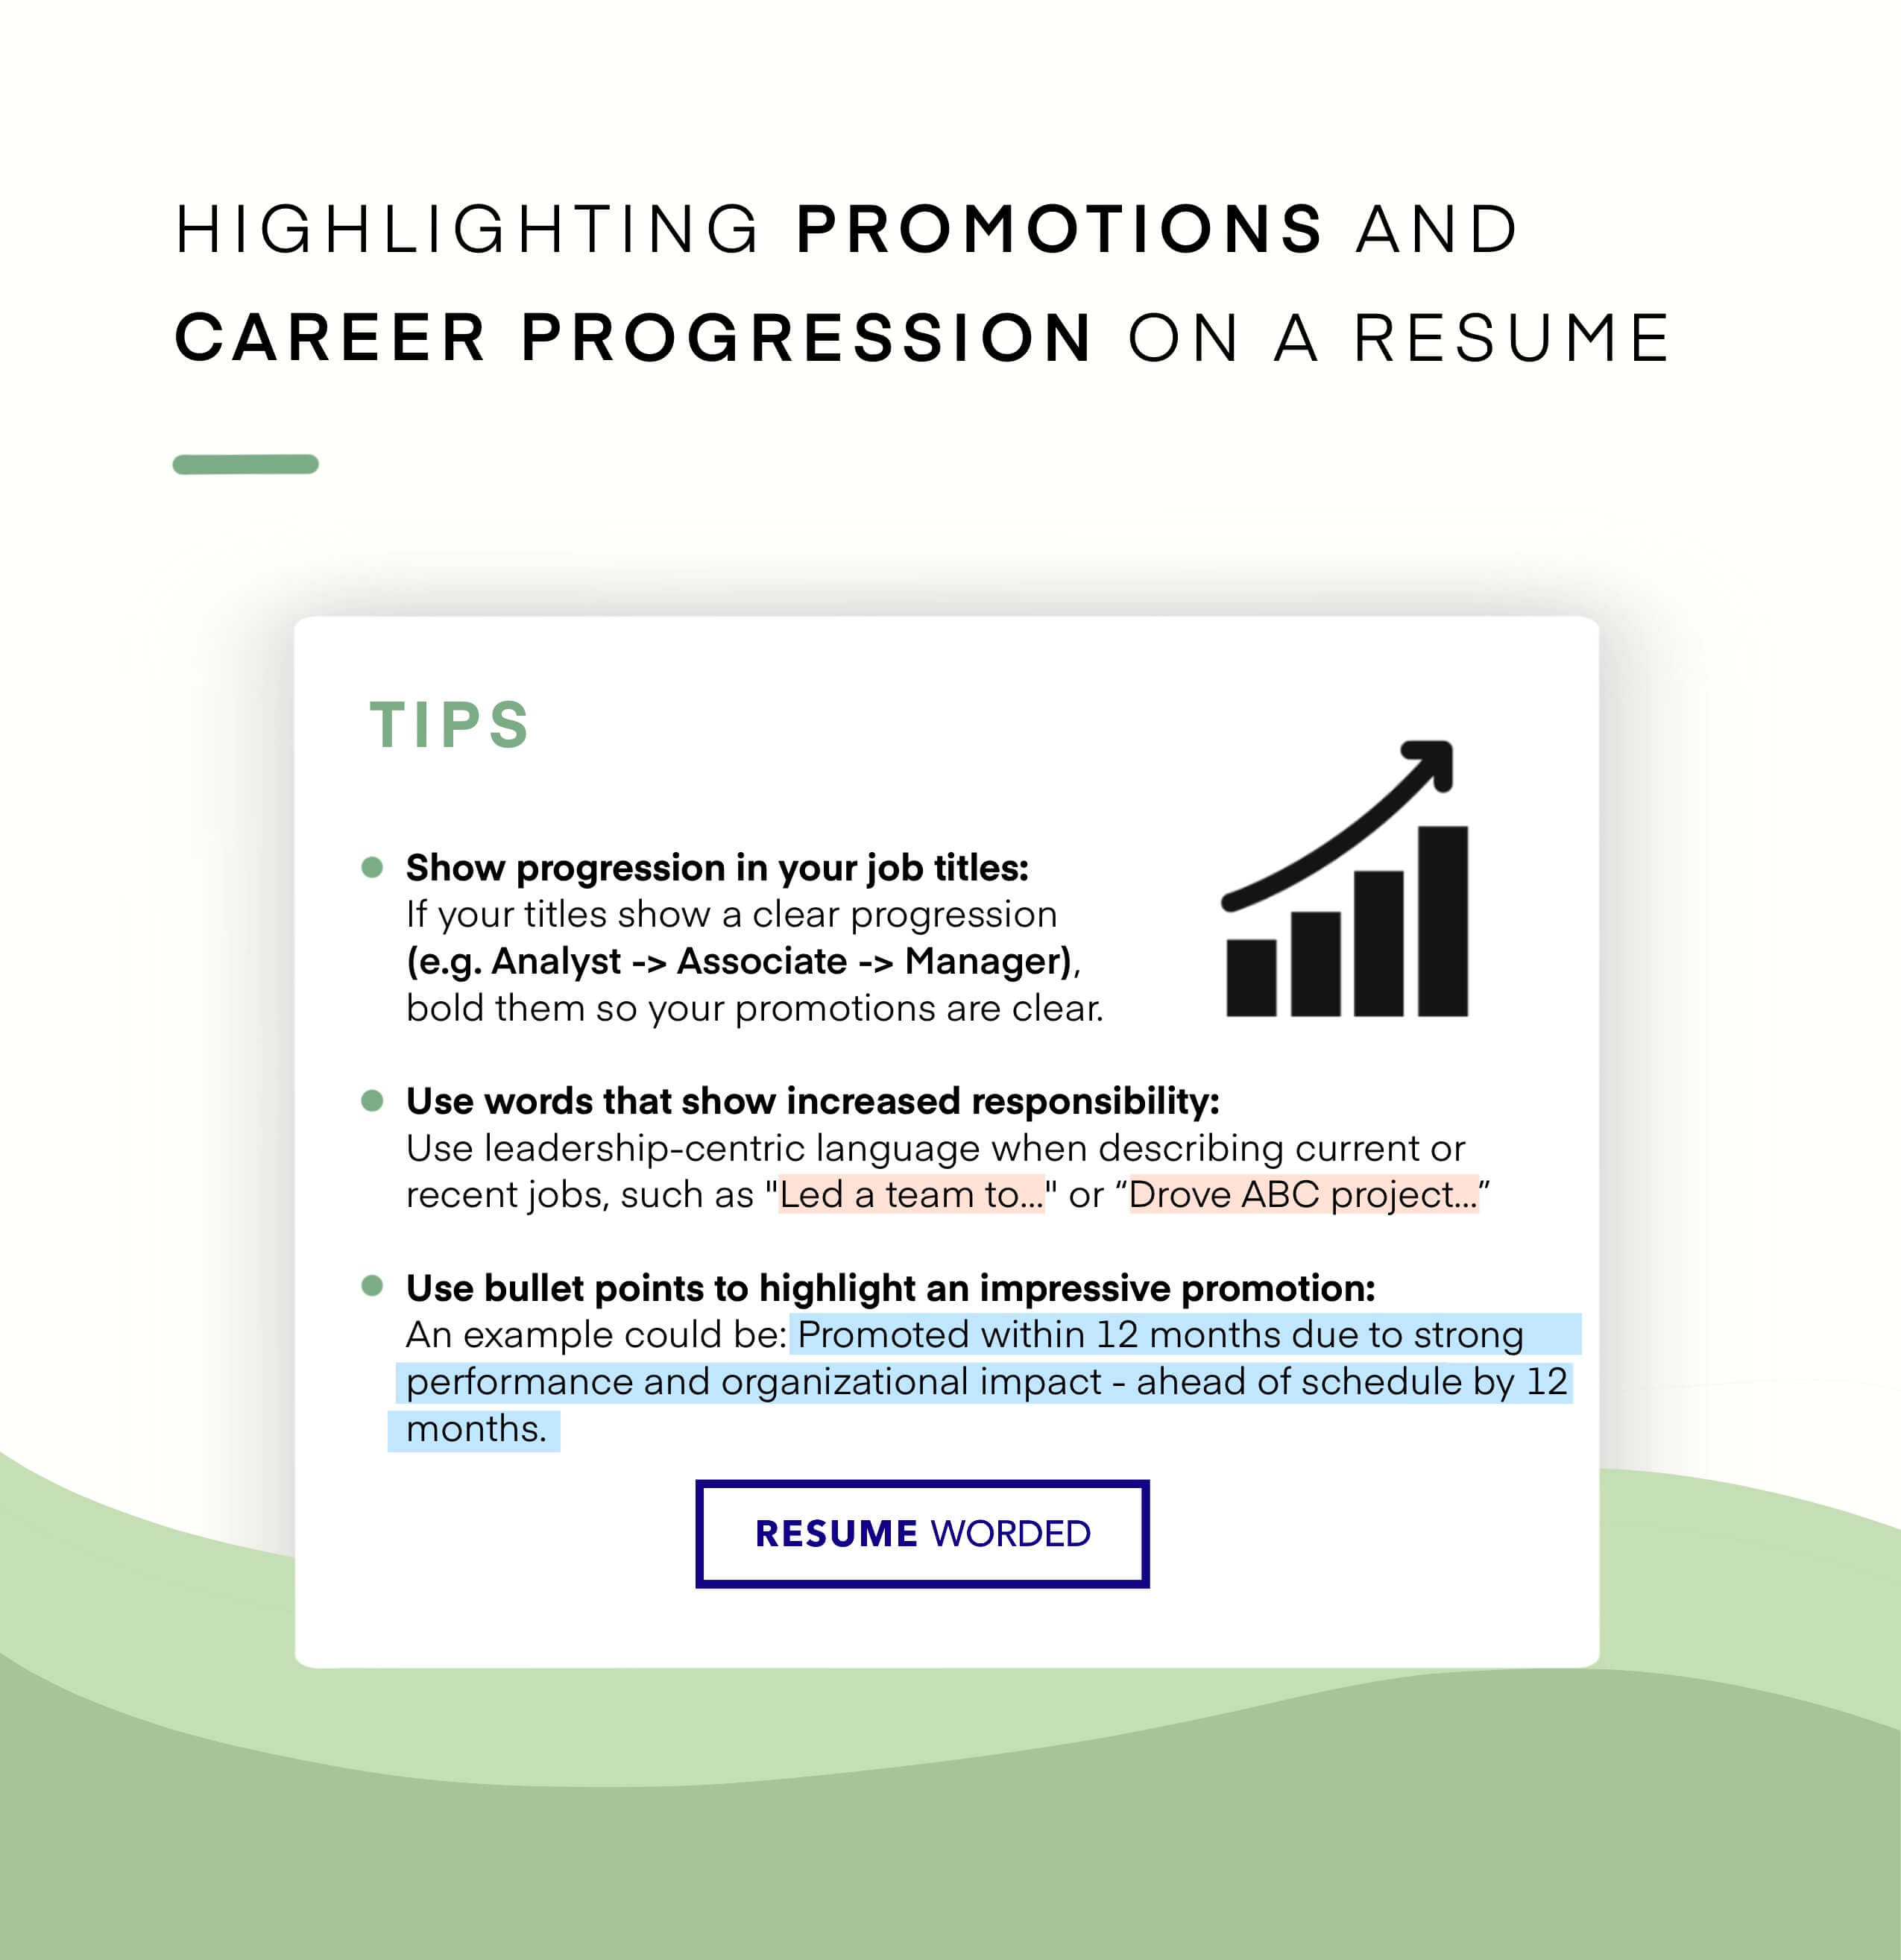 Promotions demonstrate professional growth - Senior Business Analyst Resume